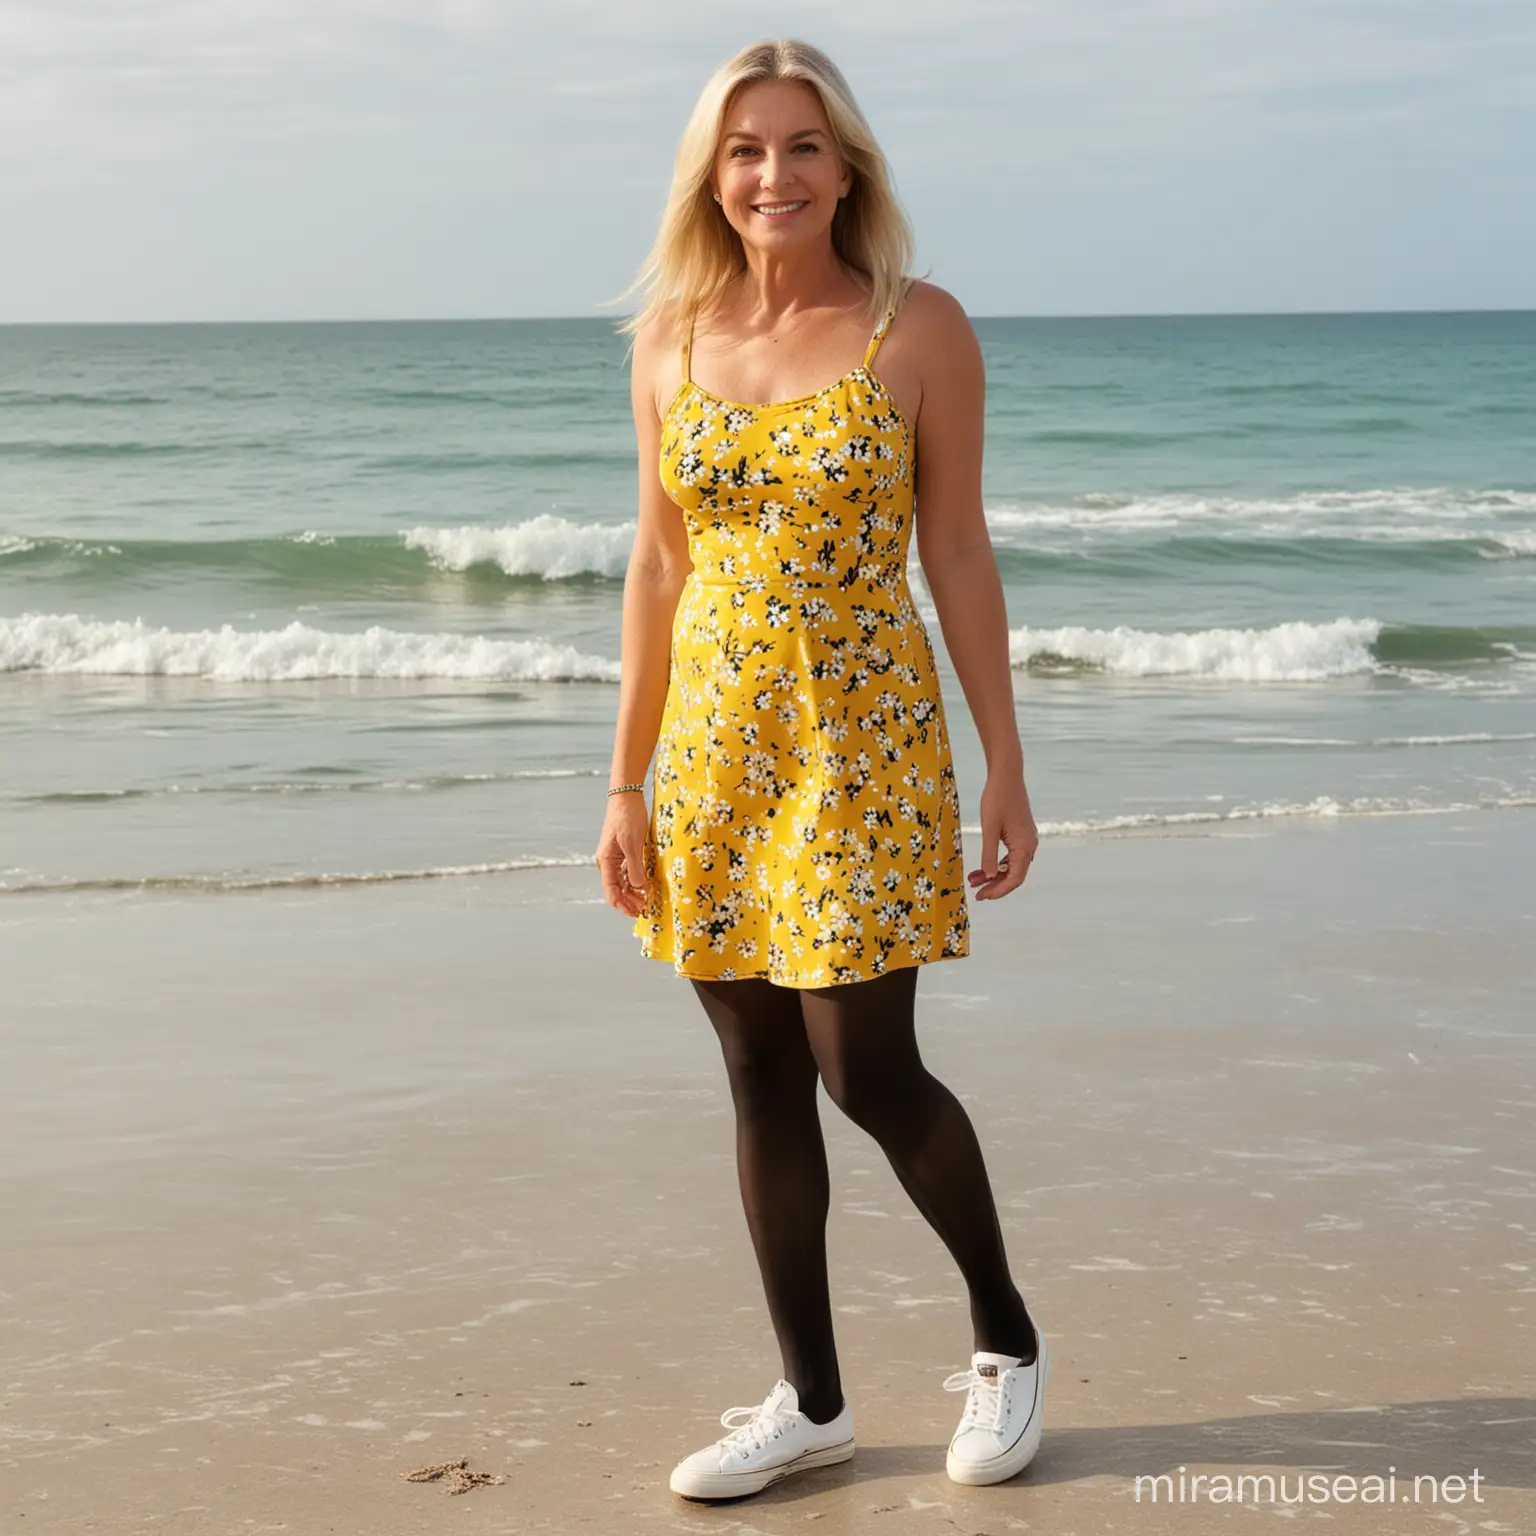 55 year old lady, mid-length straight blonde hair, small boobs, wide hips, shiny black pantyhose, nylon tights, wearing yellow, flower sundress, white keds sneakers,standing on sandy Florida beach